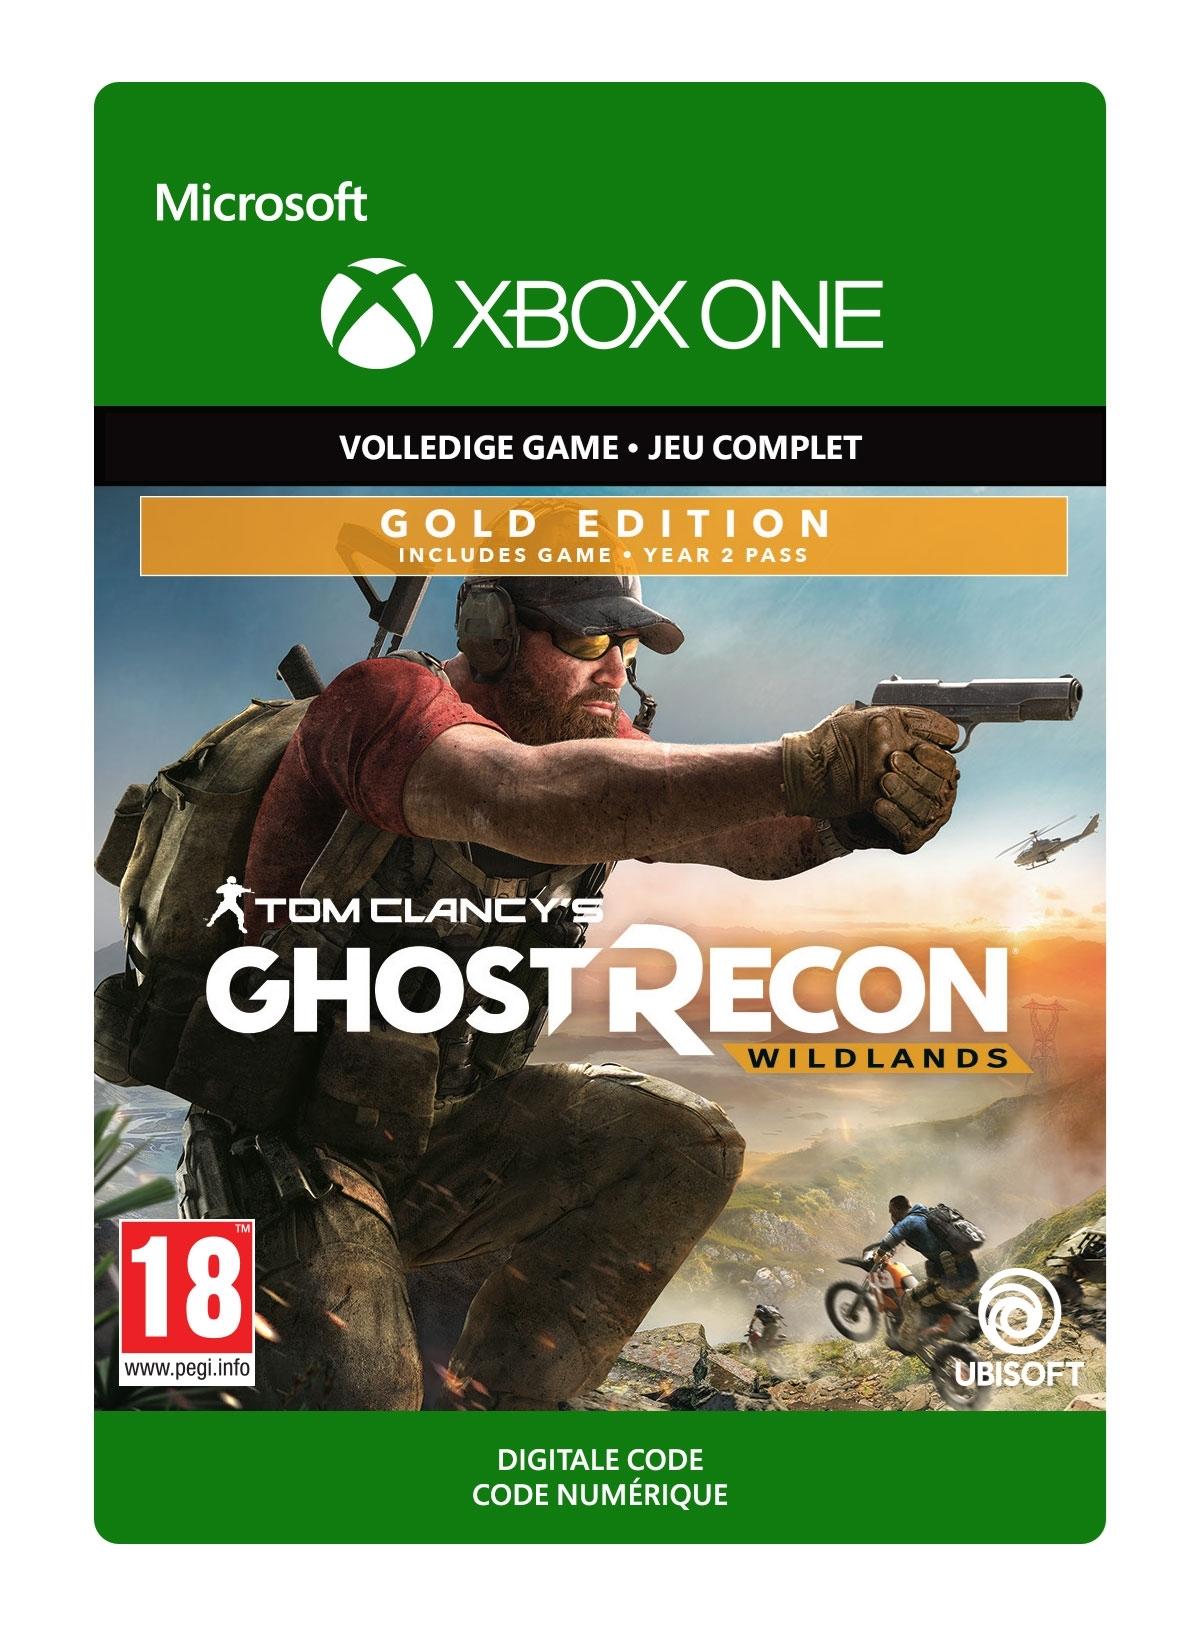 Tom Clancy's Ghost Recon Wildlands: Gold Year 2 - Xbox One - Game | G3Q-00511 (fdc7501c-1235-7940-a821-fa8d9e16ec38)